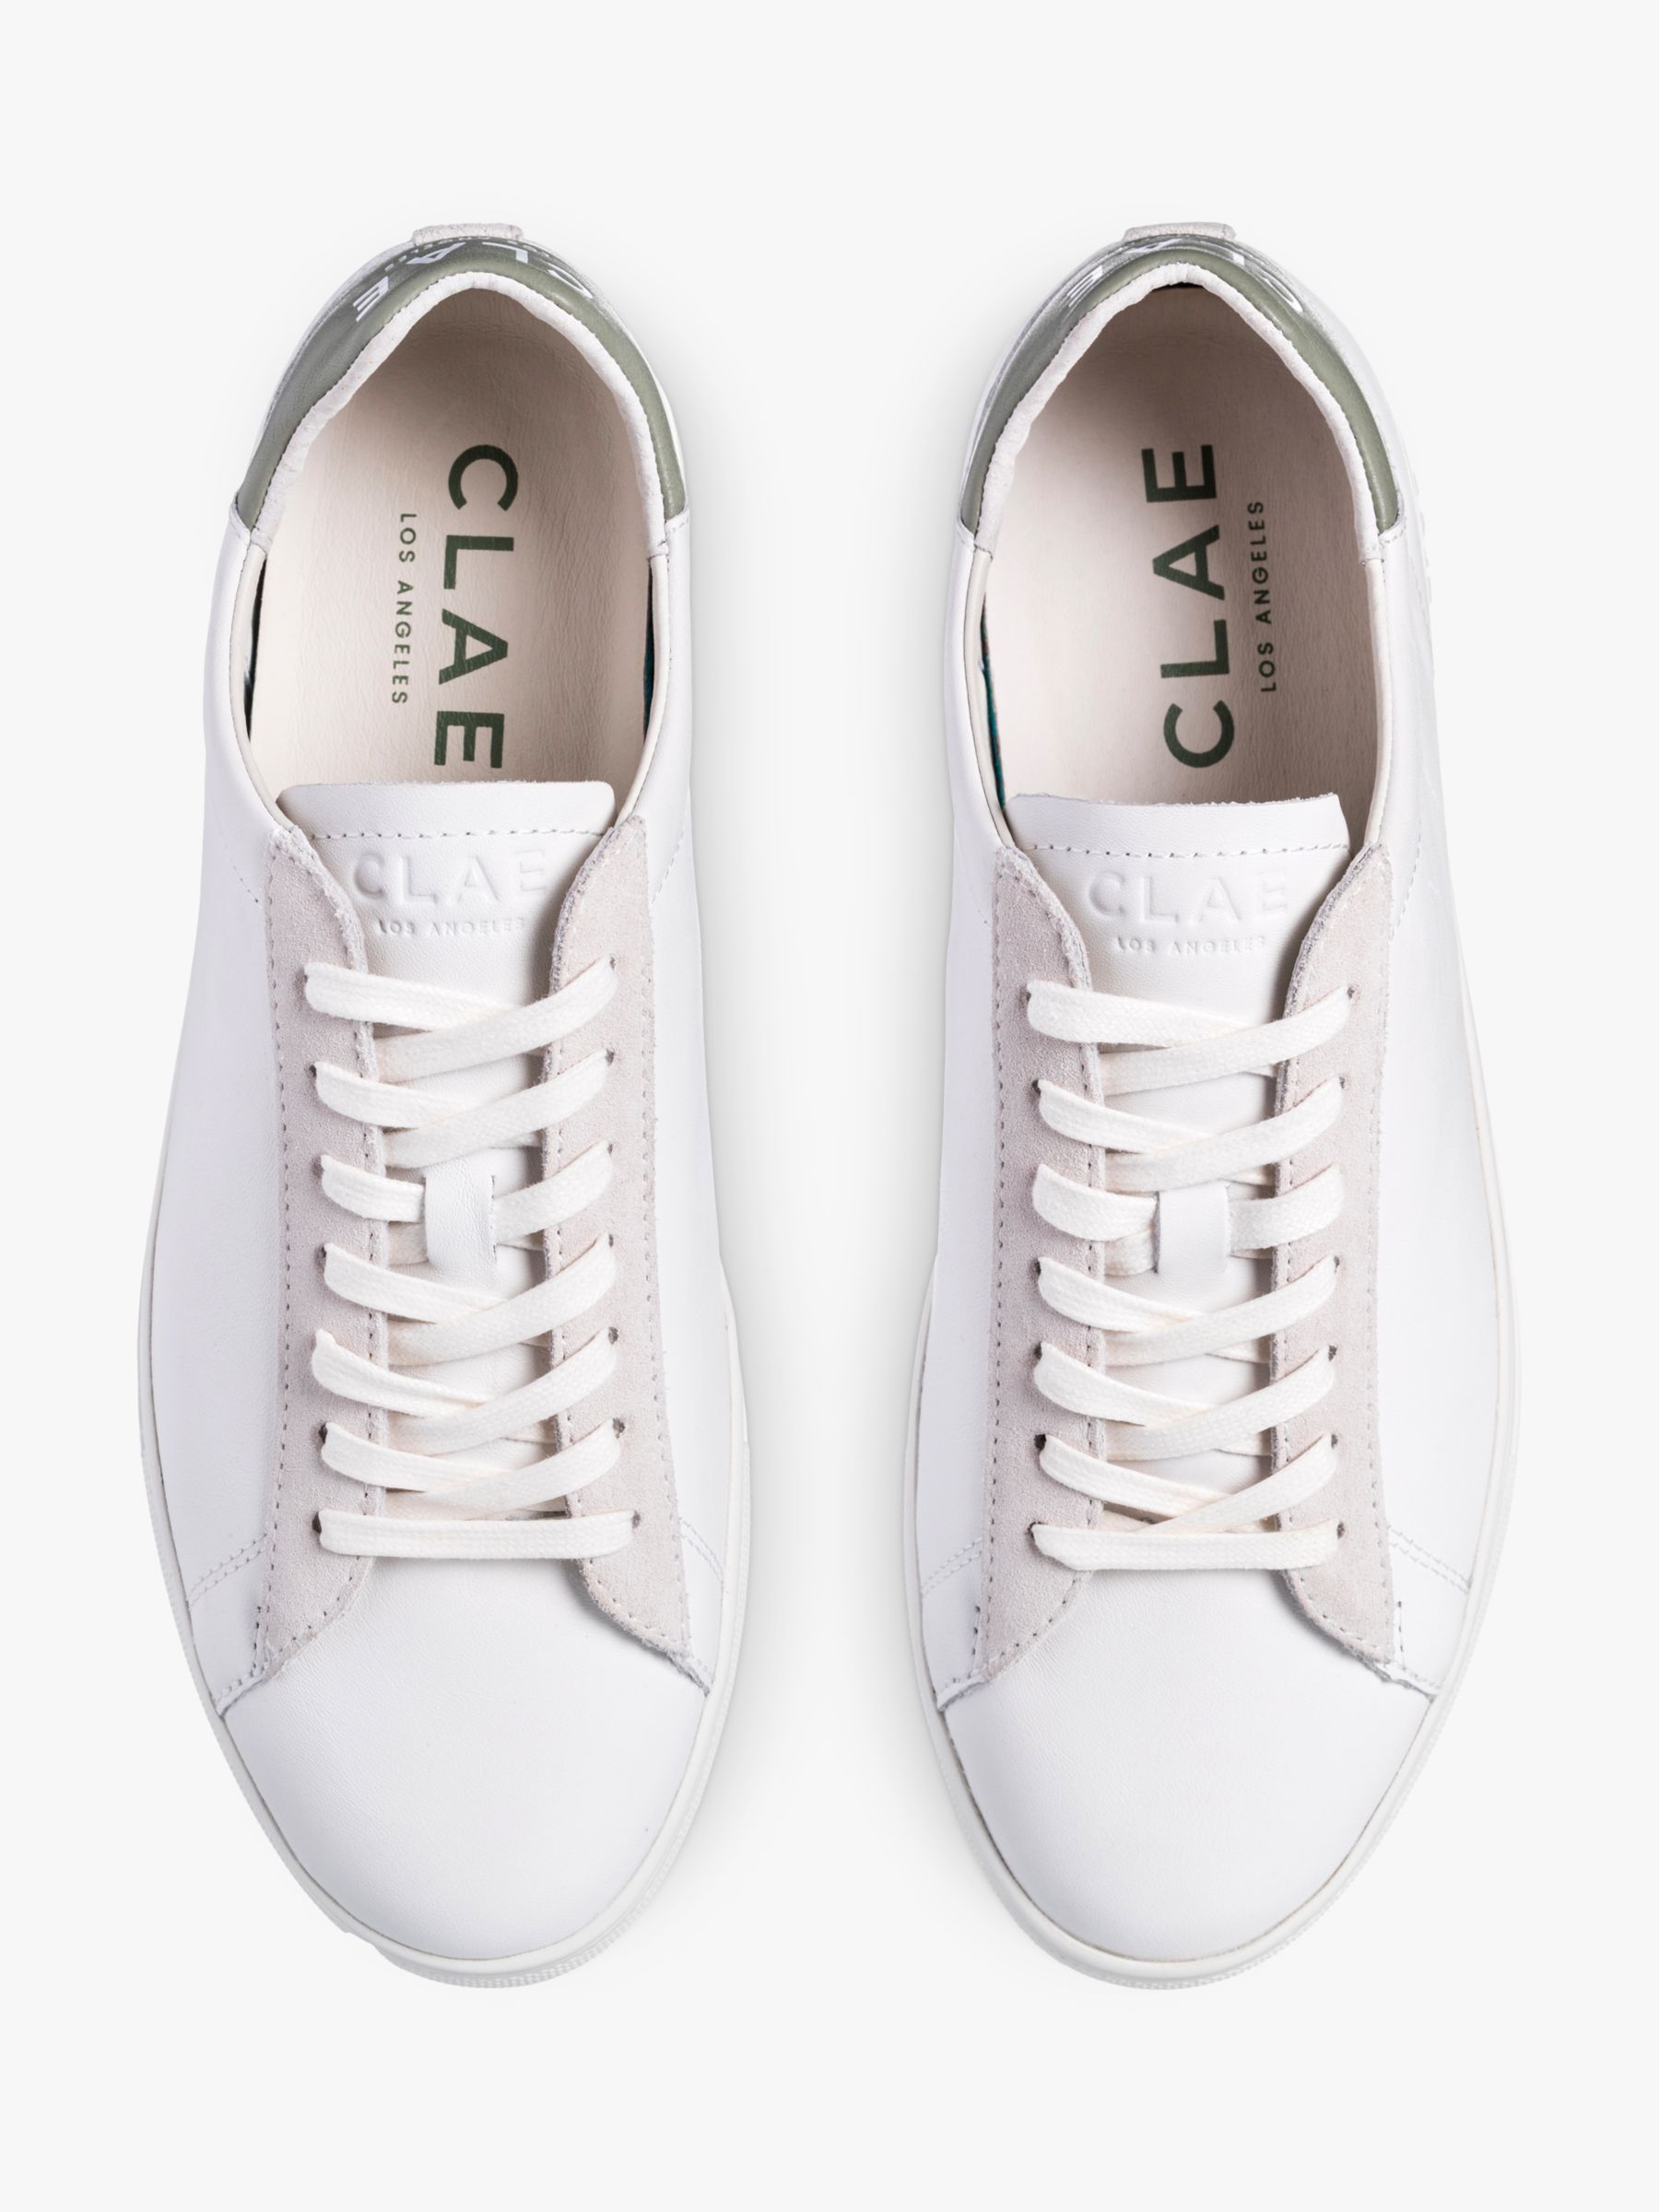 Buy CLAE Bradley Whitel Lace Up Trainers, White Online at johnlewis.com